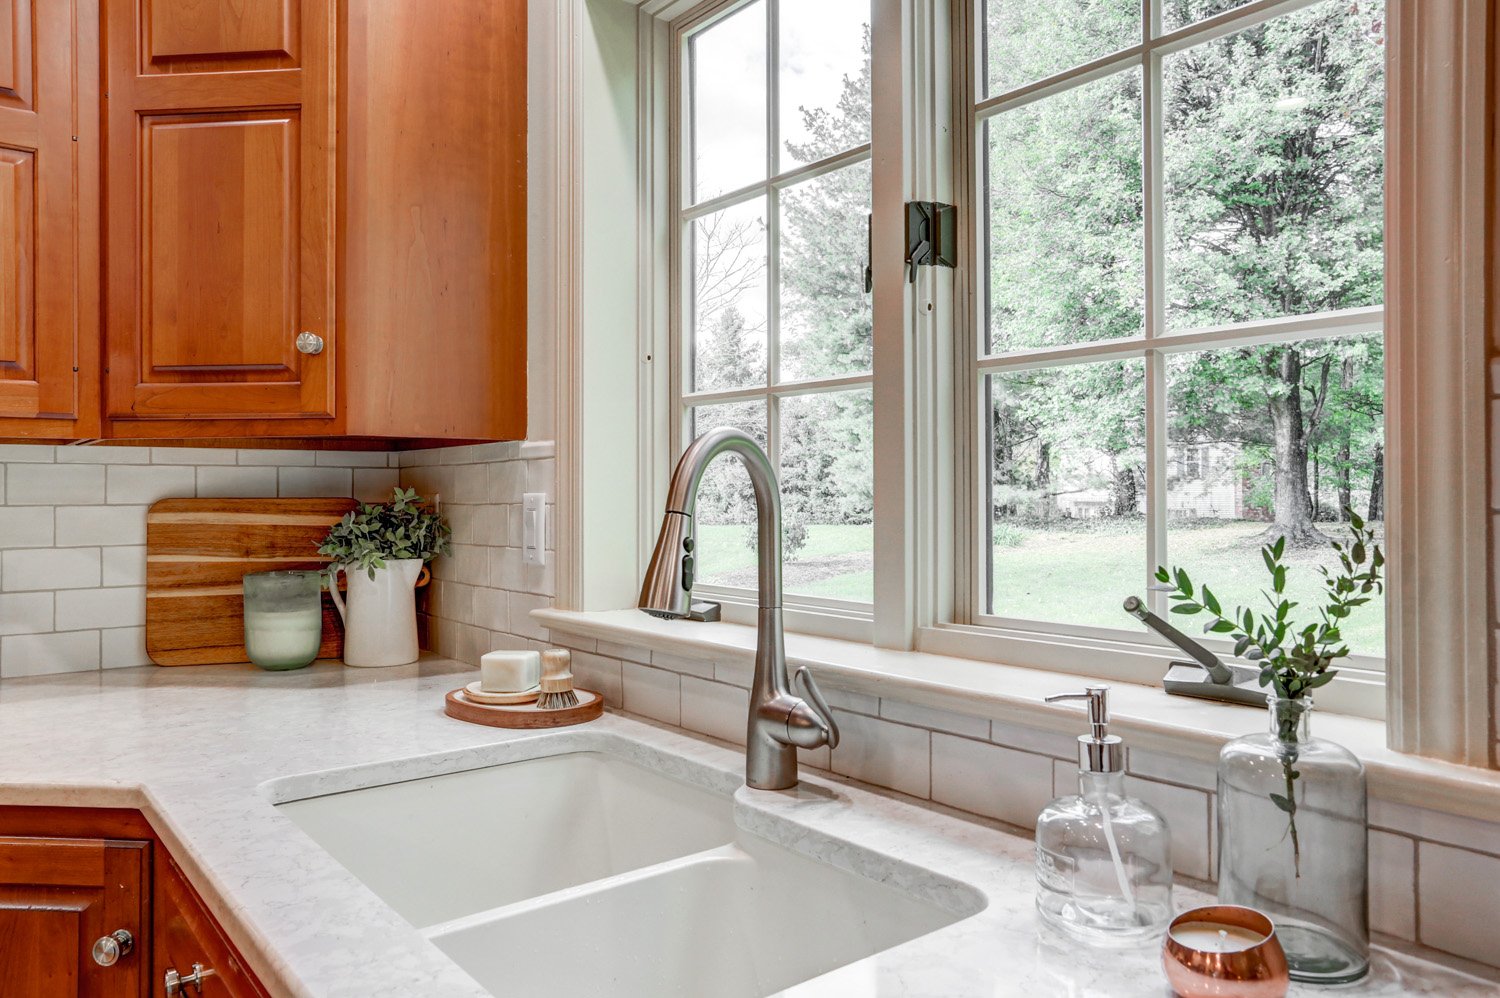 Centerville Kitchen Refresh with new window paint above new sink and faucet